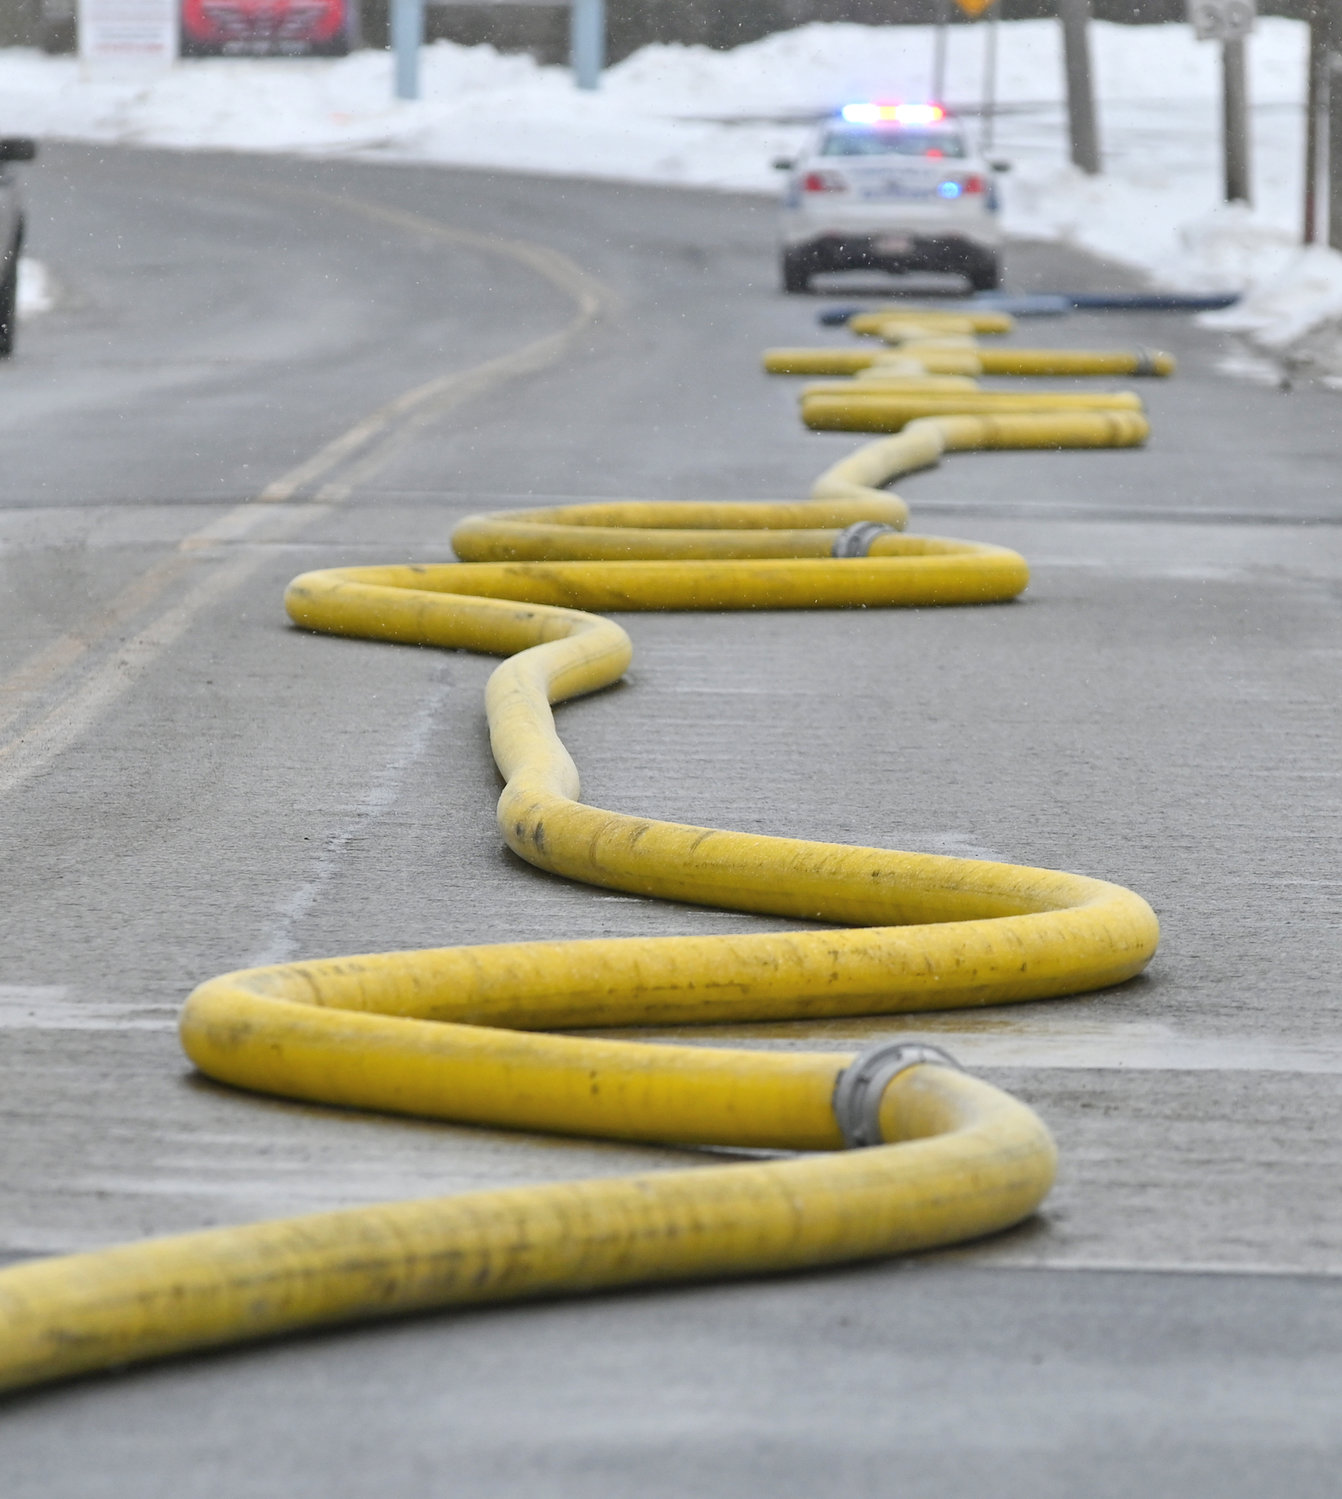 WORK TO BE DONE — A thick hoseline snakes down Main Street in Whitesboro, delivering much-needed water from a hydrant to the firefight at Nick's Lawn Service.